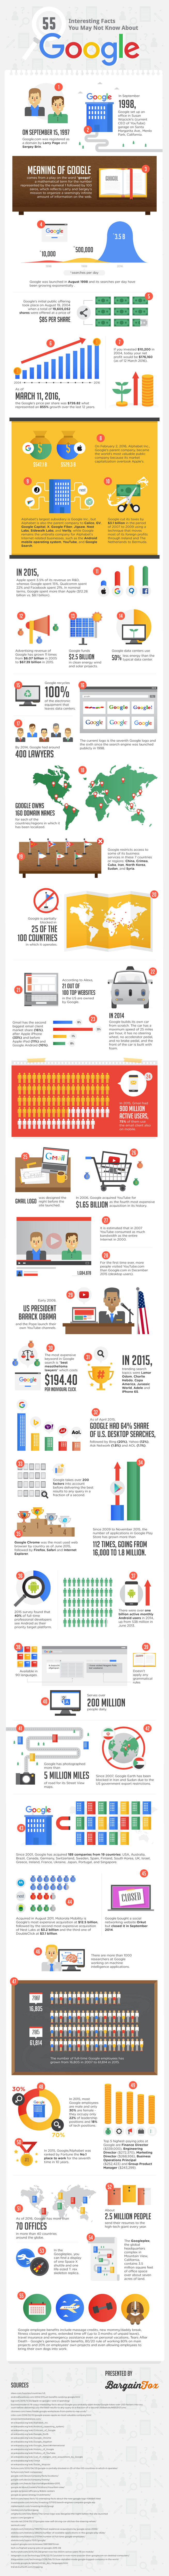 55 Interesting facts you may not know about Google by BargainFox.co.uk